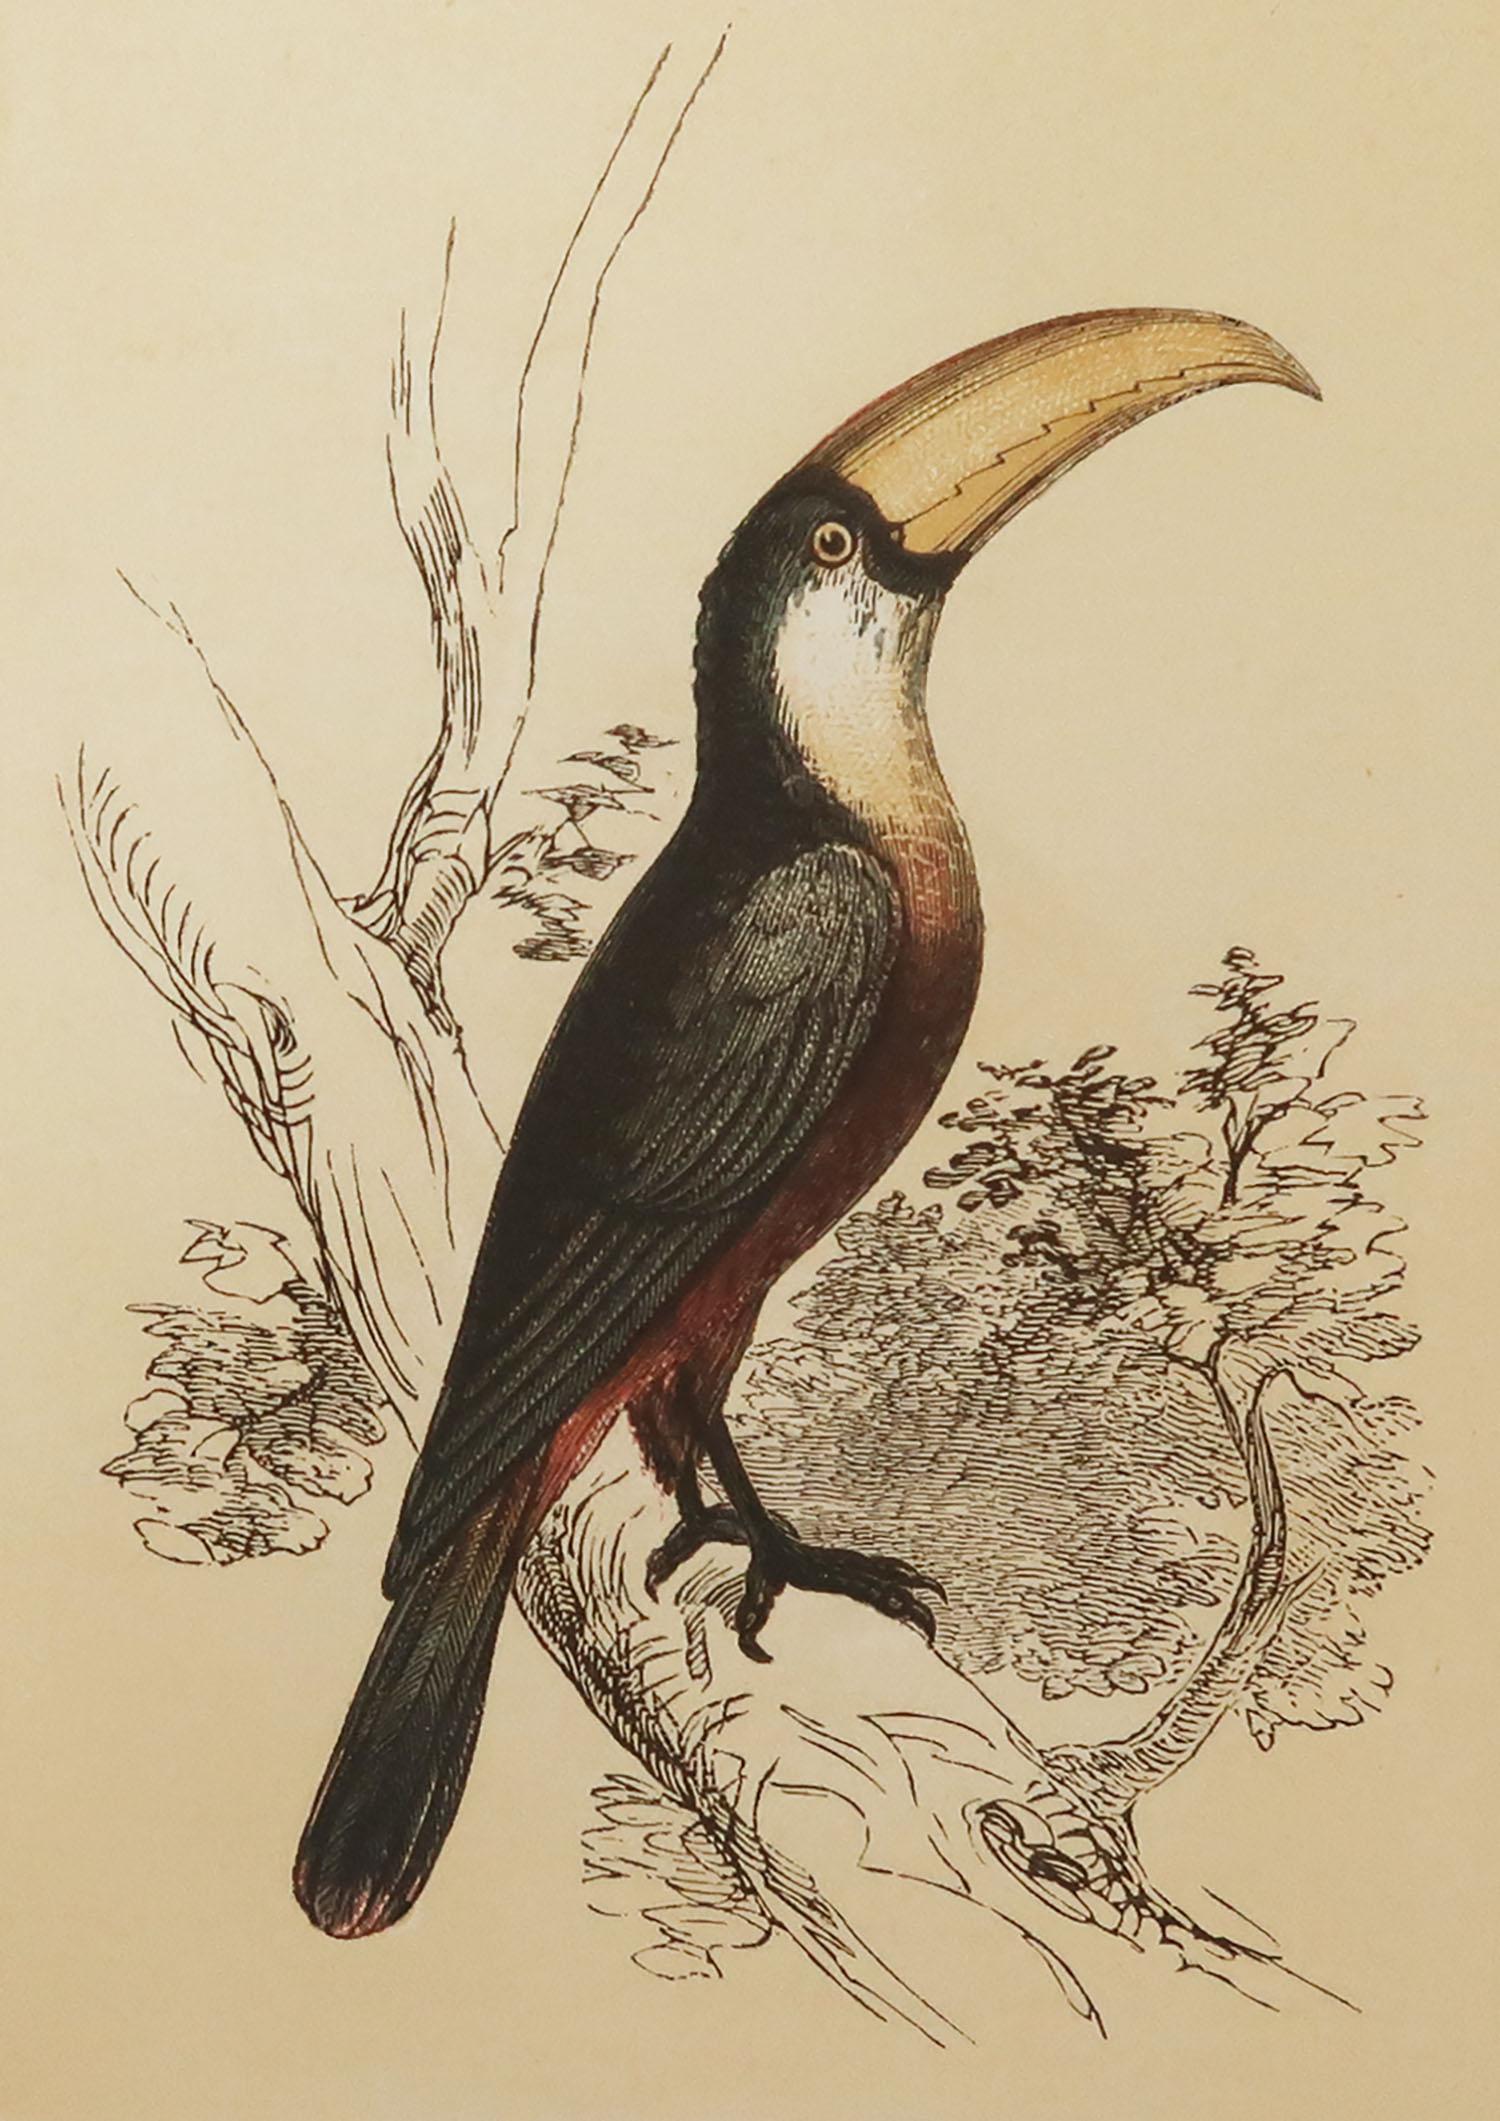 Great image of a toucan

Unframed. It gives you the option of perhaps making a set up using your own choice of frames.

Lithograph with original color.

Published by Tallis circa 1850

Crudely inscribed title has been erased at the bottom of